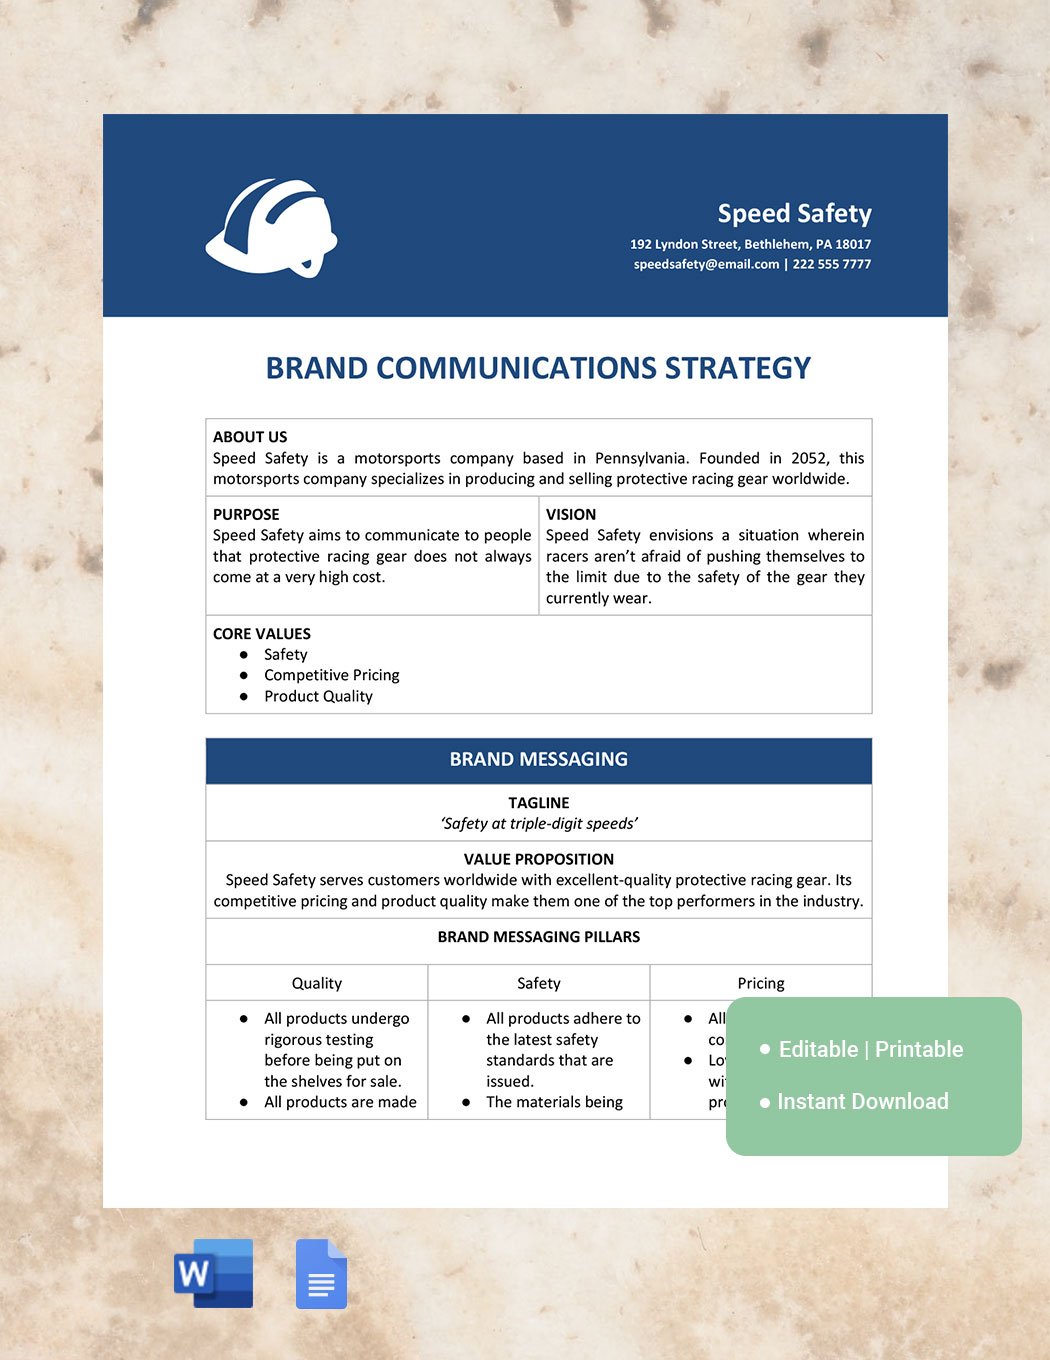 Brand Communications Strategy Template in Word, Google Docs